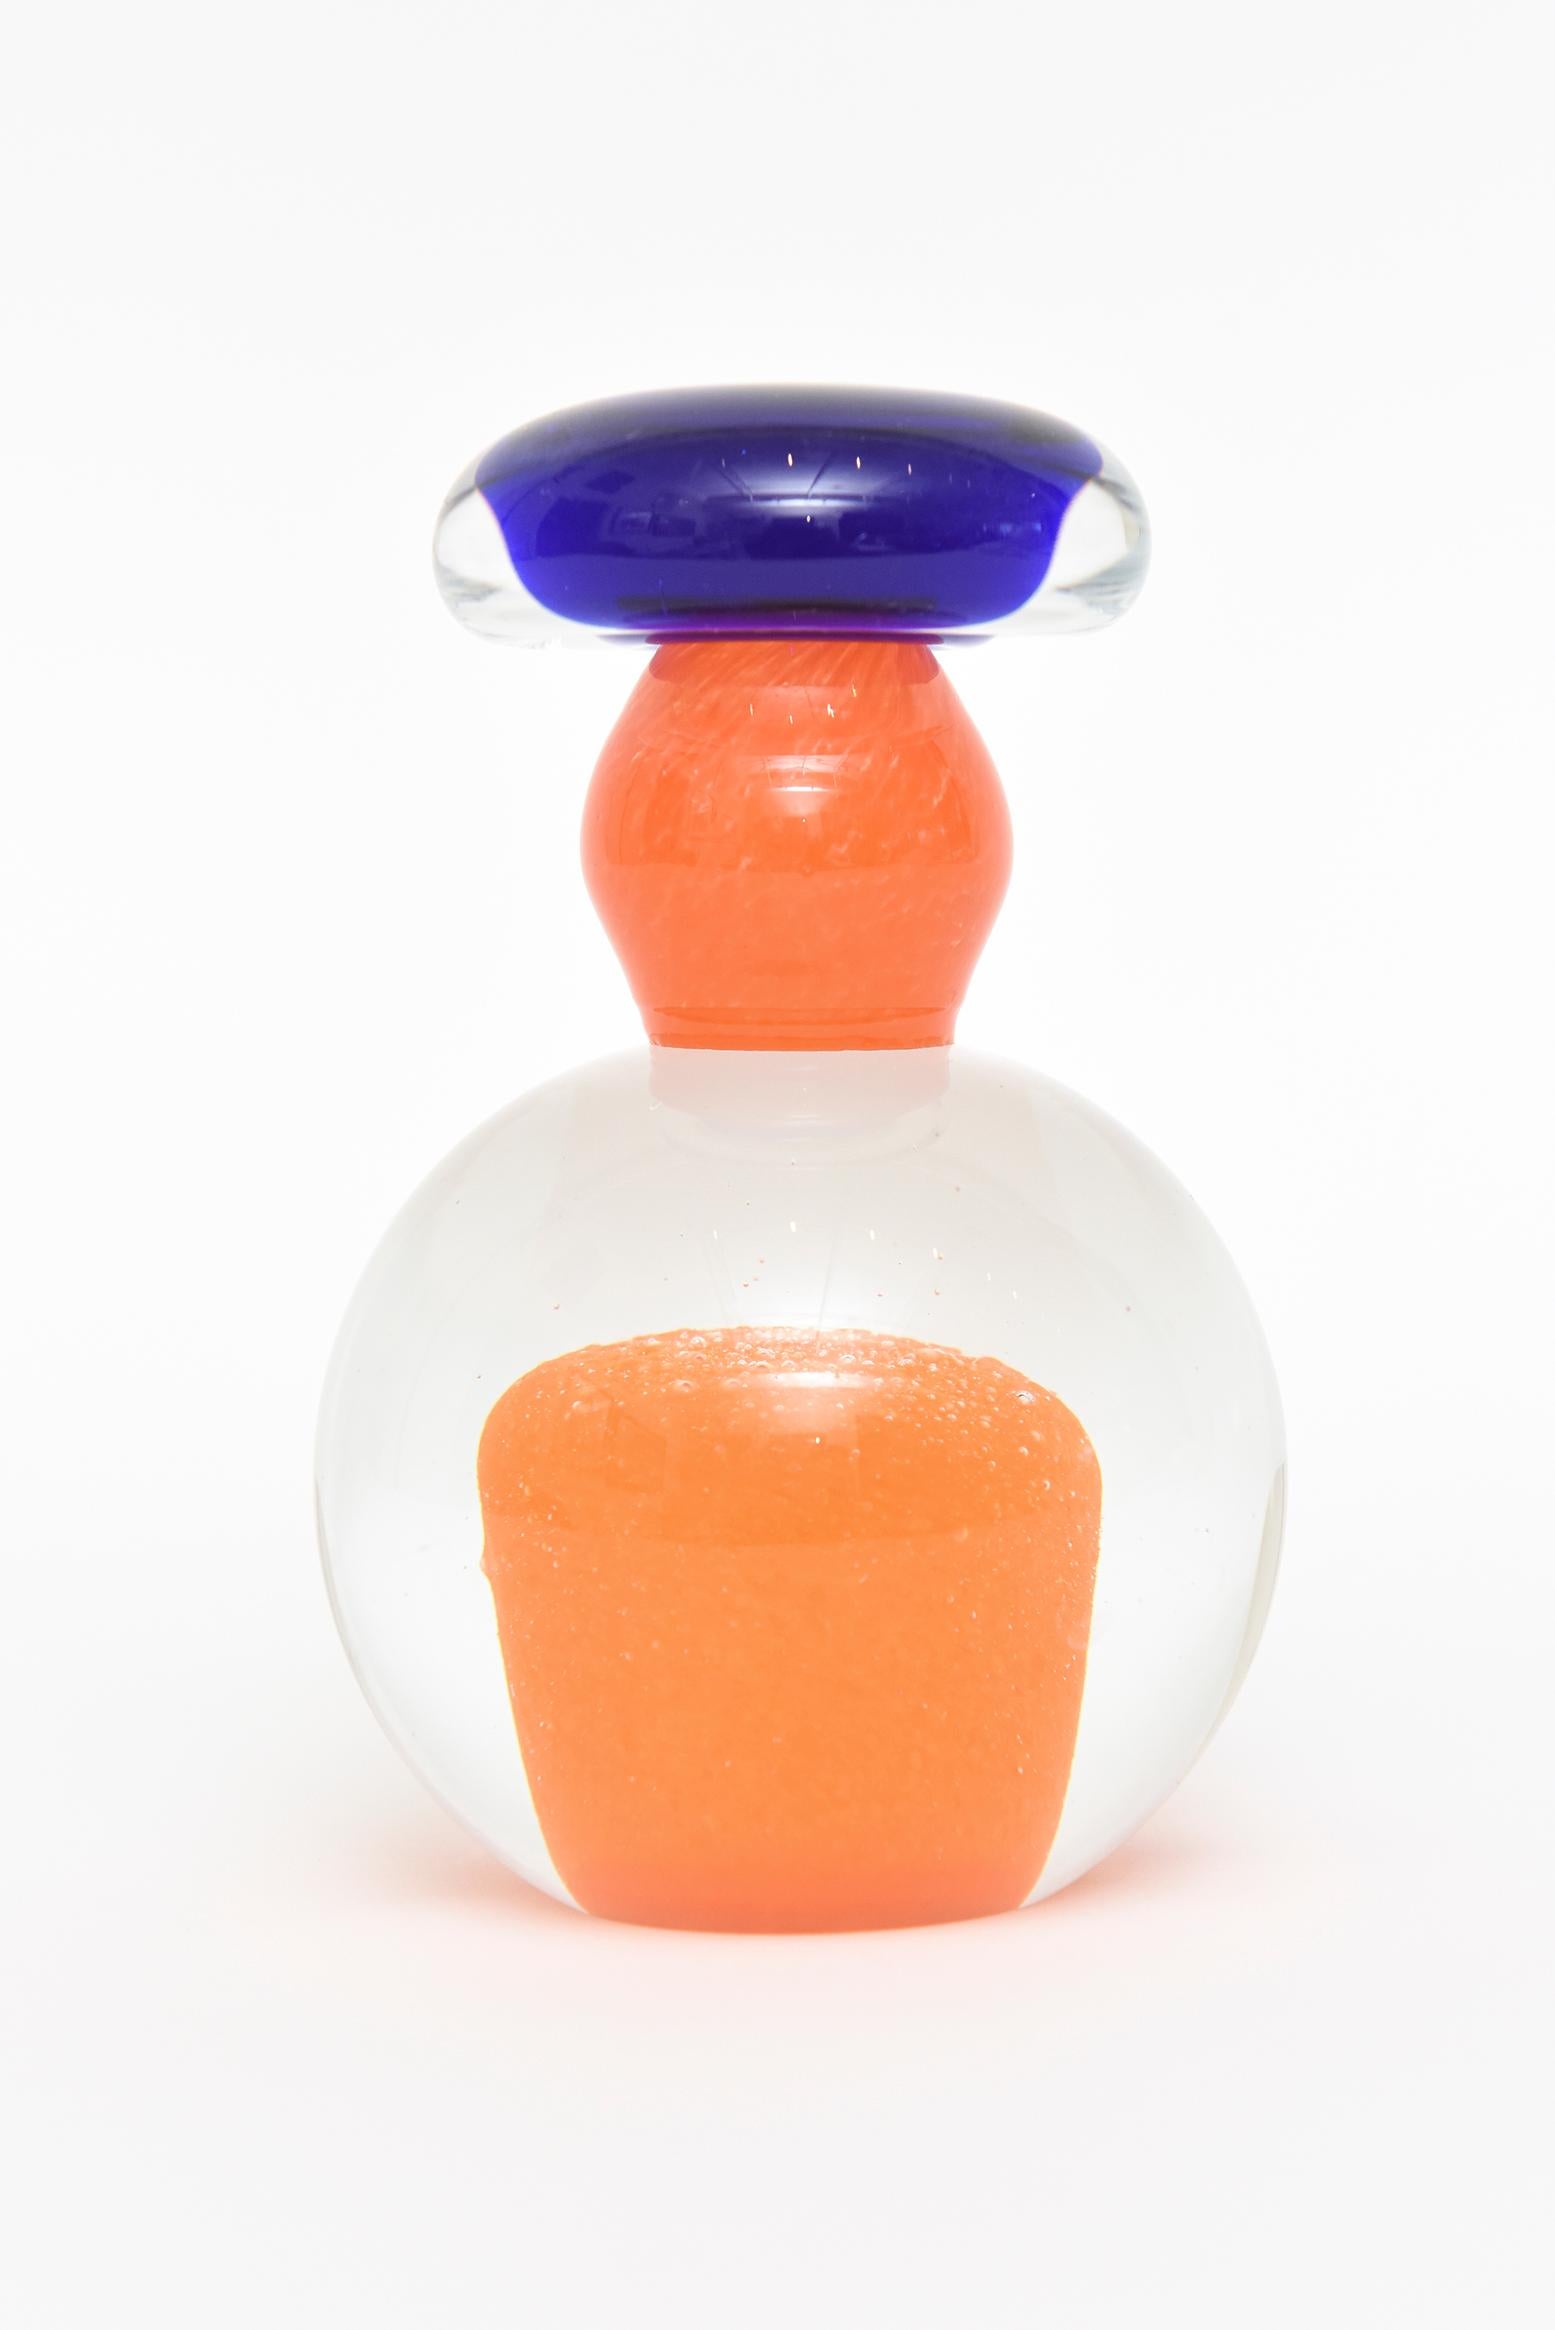 This Kosta Boda glass paperweight sculpture has immersions of an orange blob floating inside the clear. It has tiny dots on top and looks like an orange marshmallow. The mottled orange neck is typical of Kosta Boda. The cobalt blue top pops! The